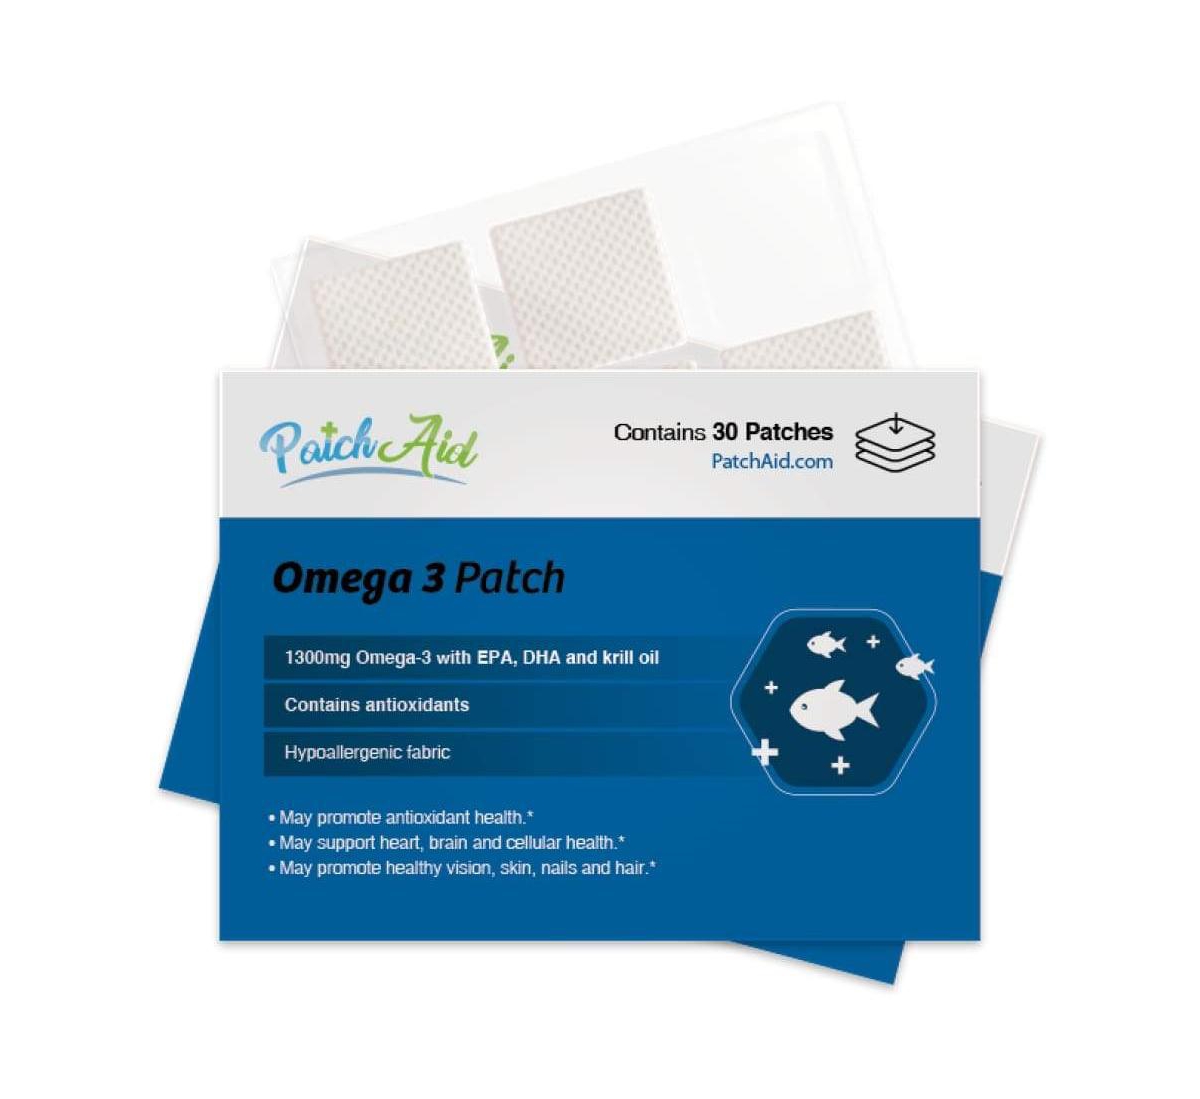 Omega-3 Vitamin Patch by PatchAid (30-Day Supply) - White